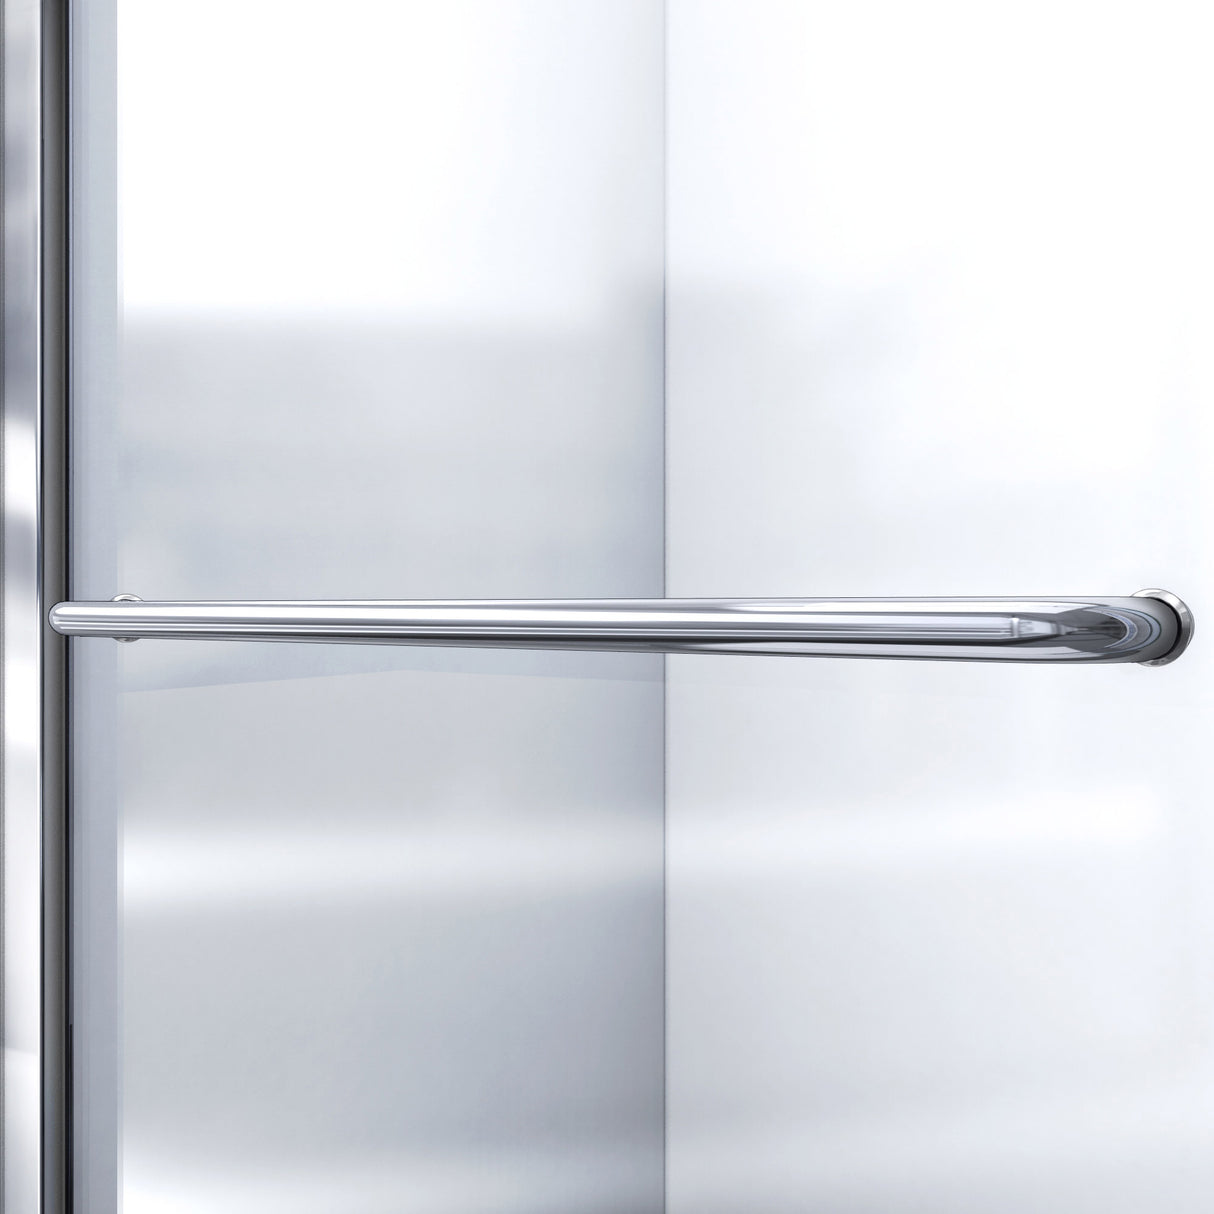 DreamLine Infinity-Z 30 in. D x 60 in. W x 76 3/4 in. H Frosted Sliding Shower Door in Brushed Nickel, Center Drain Base, Wall Kit